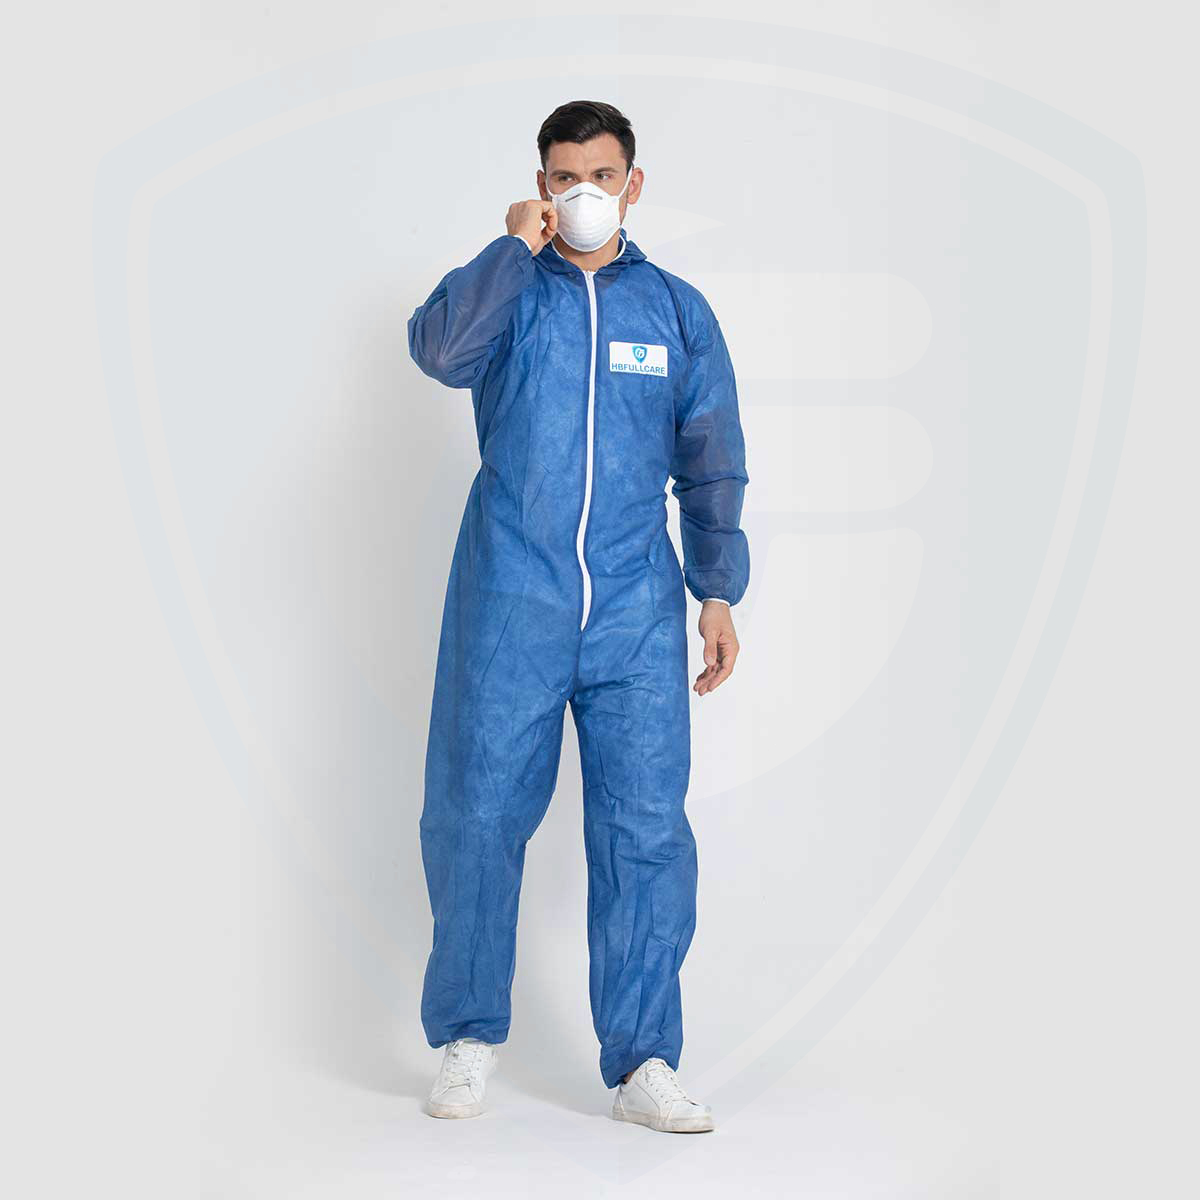 Basic Protection Blue Adult Disposable Coverall Polypropylene Fabric with Hood